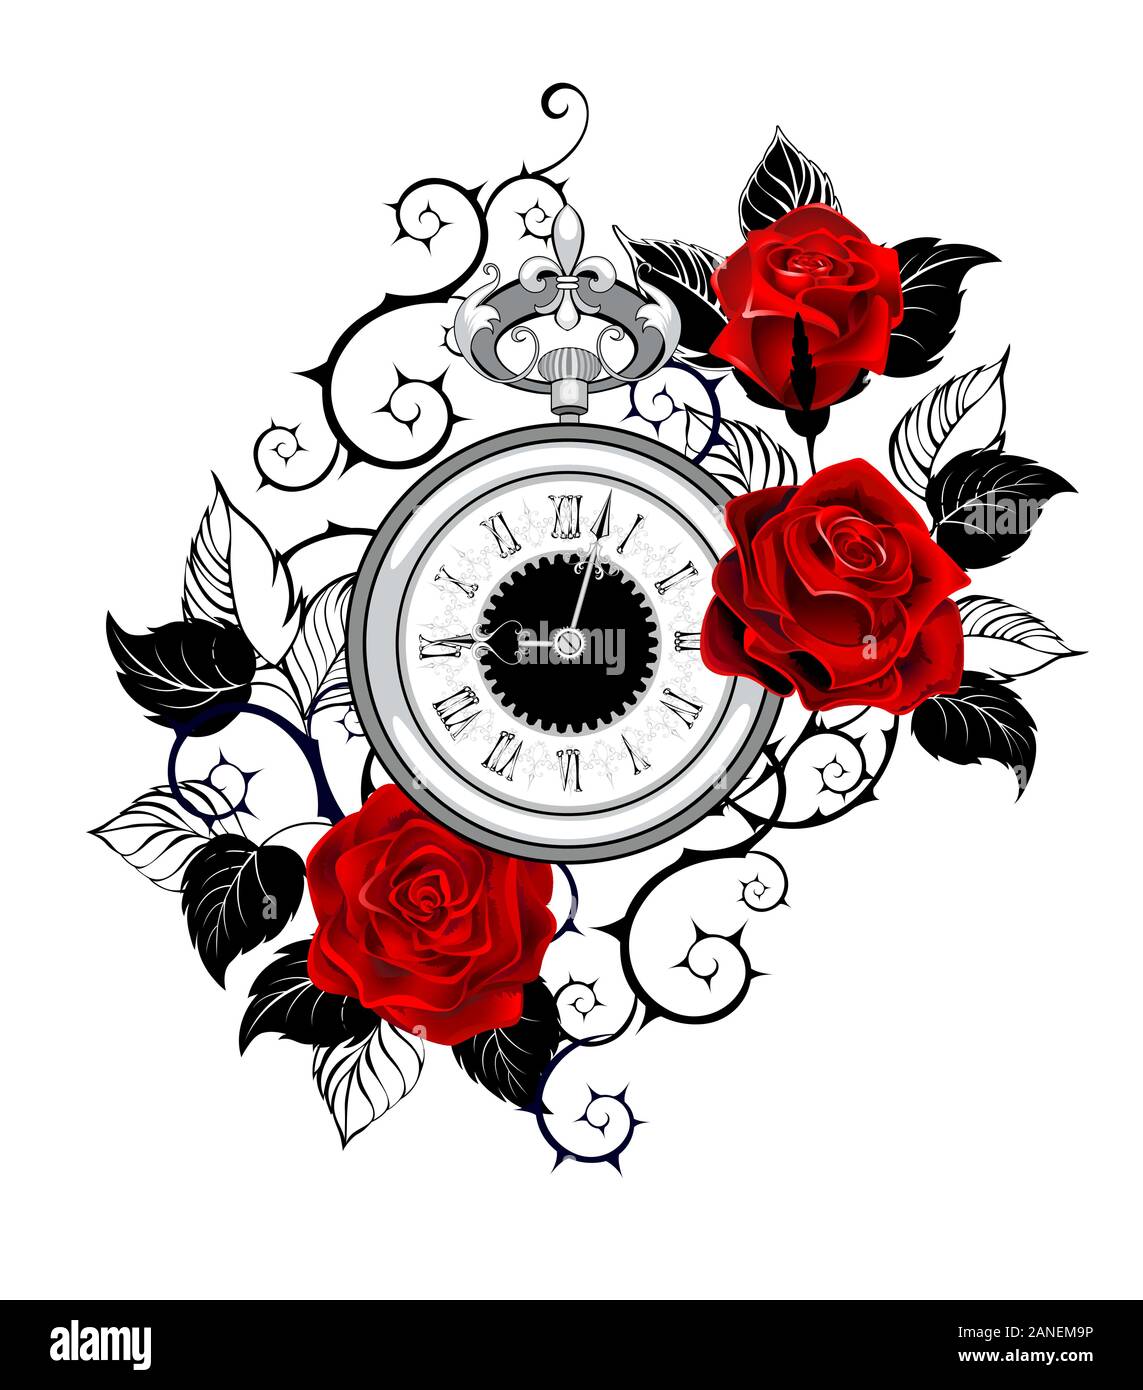 Contour, monochrome, antique clocks decorated with red roses with black contour leaves and stems. Tattoo style. Stock Vector